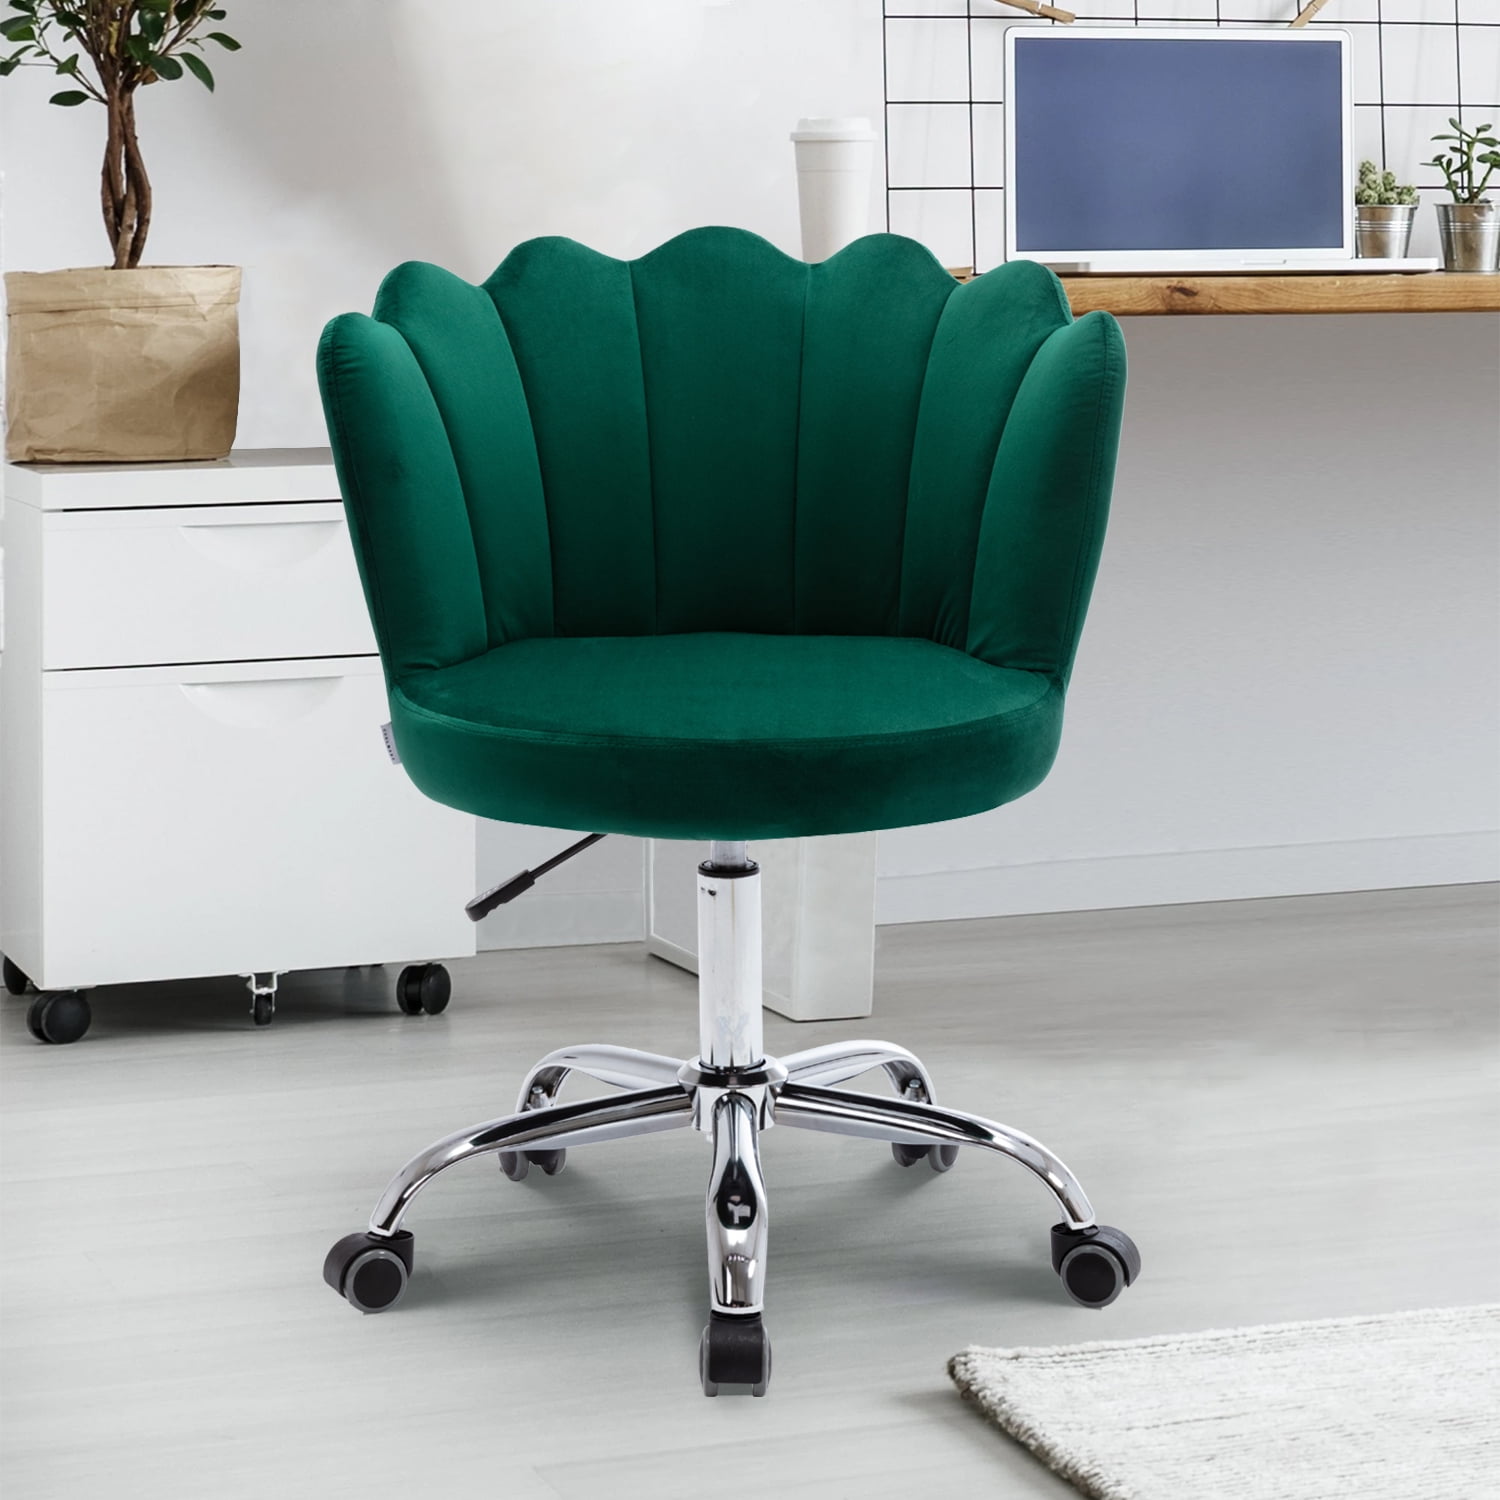 Accent Chair With Wheels Accent Chairs For Small Spaces – Redboth.com